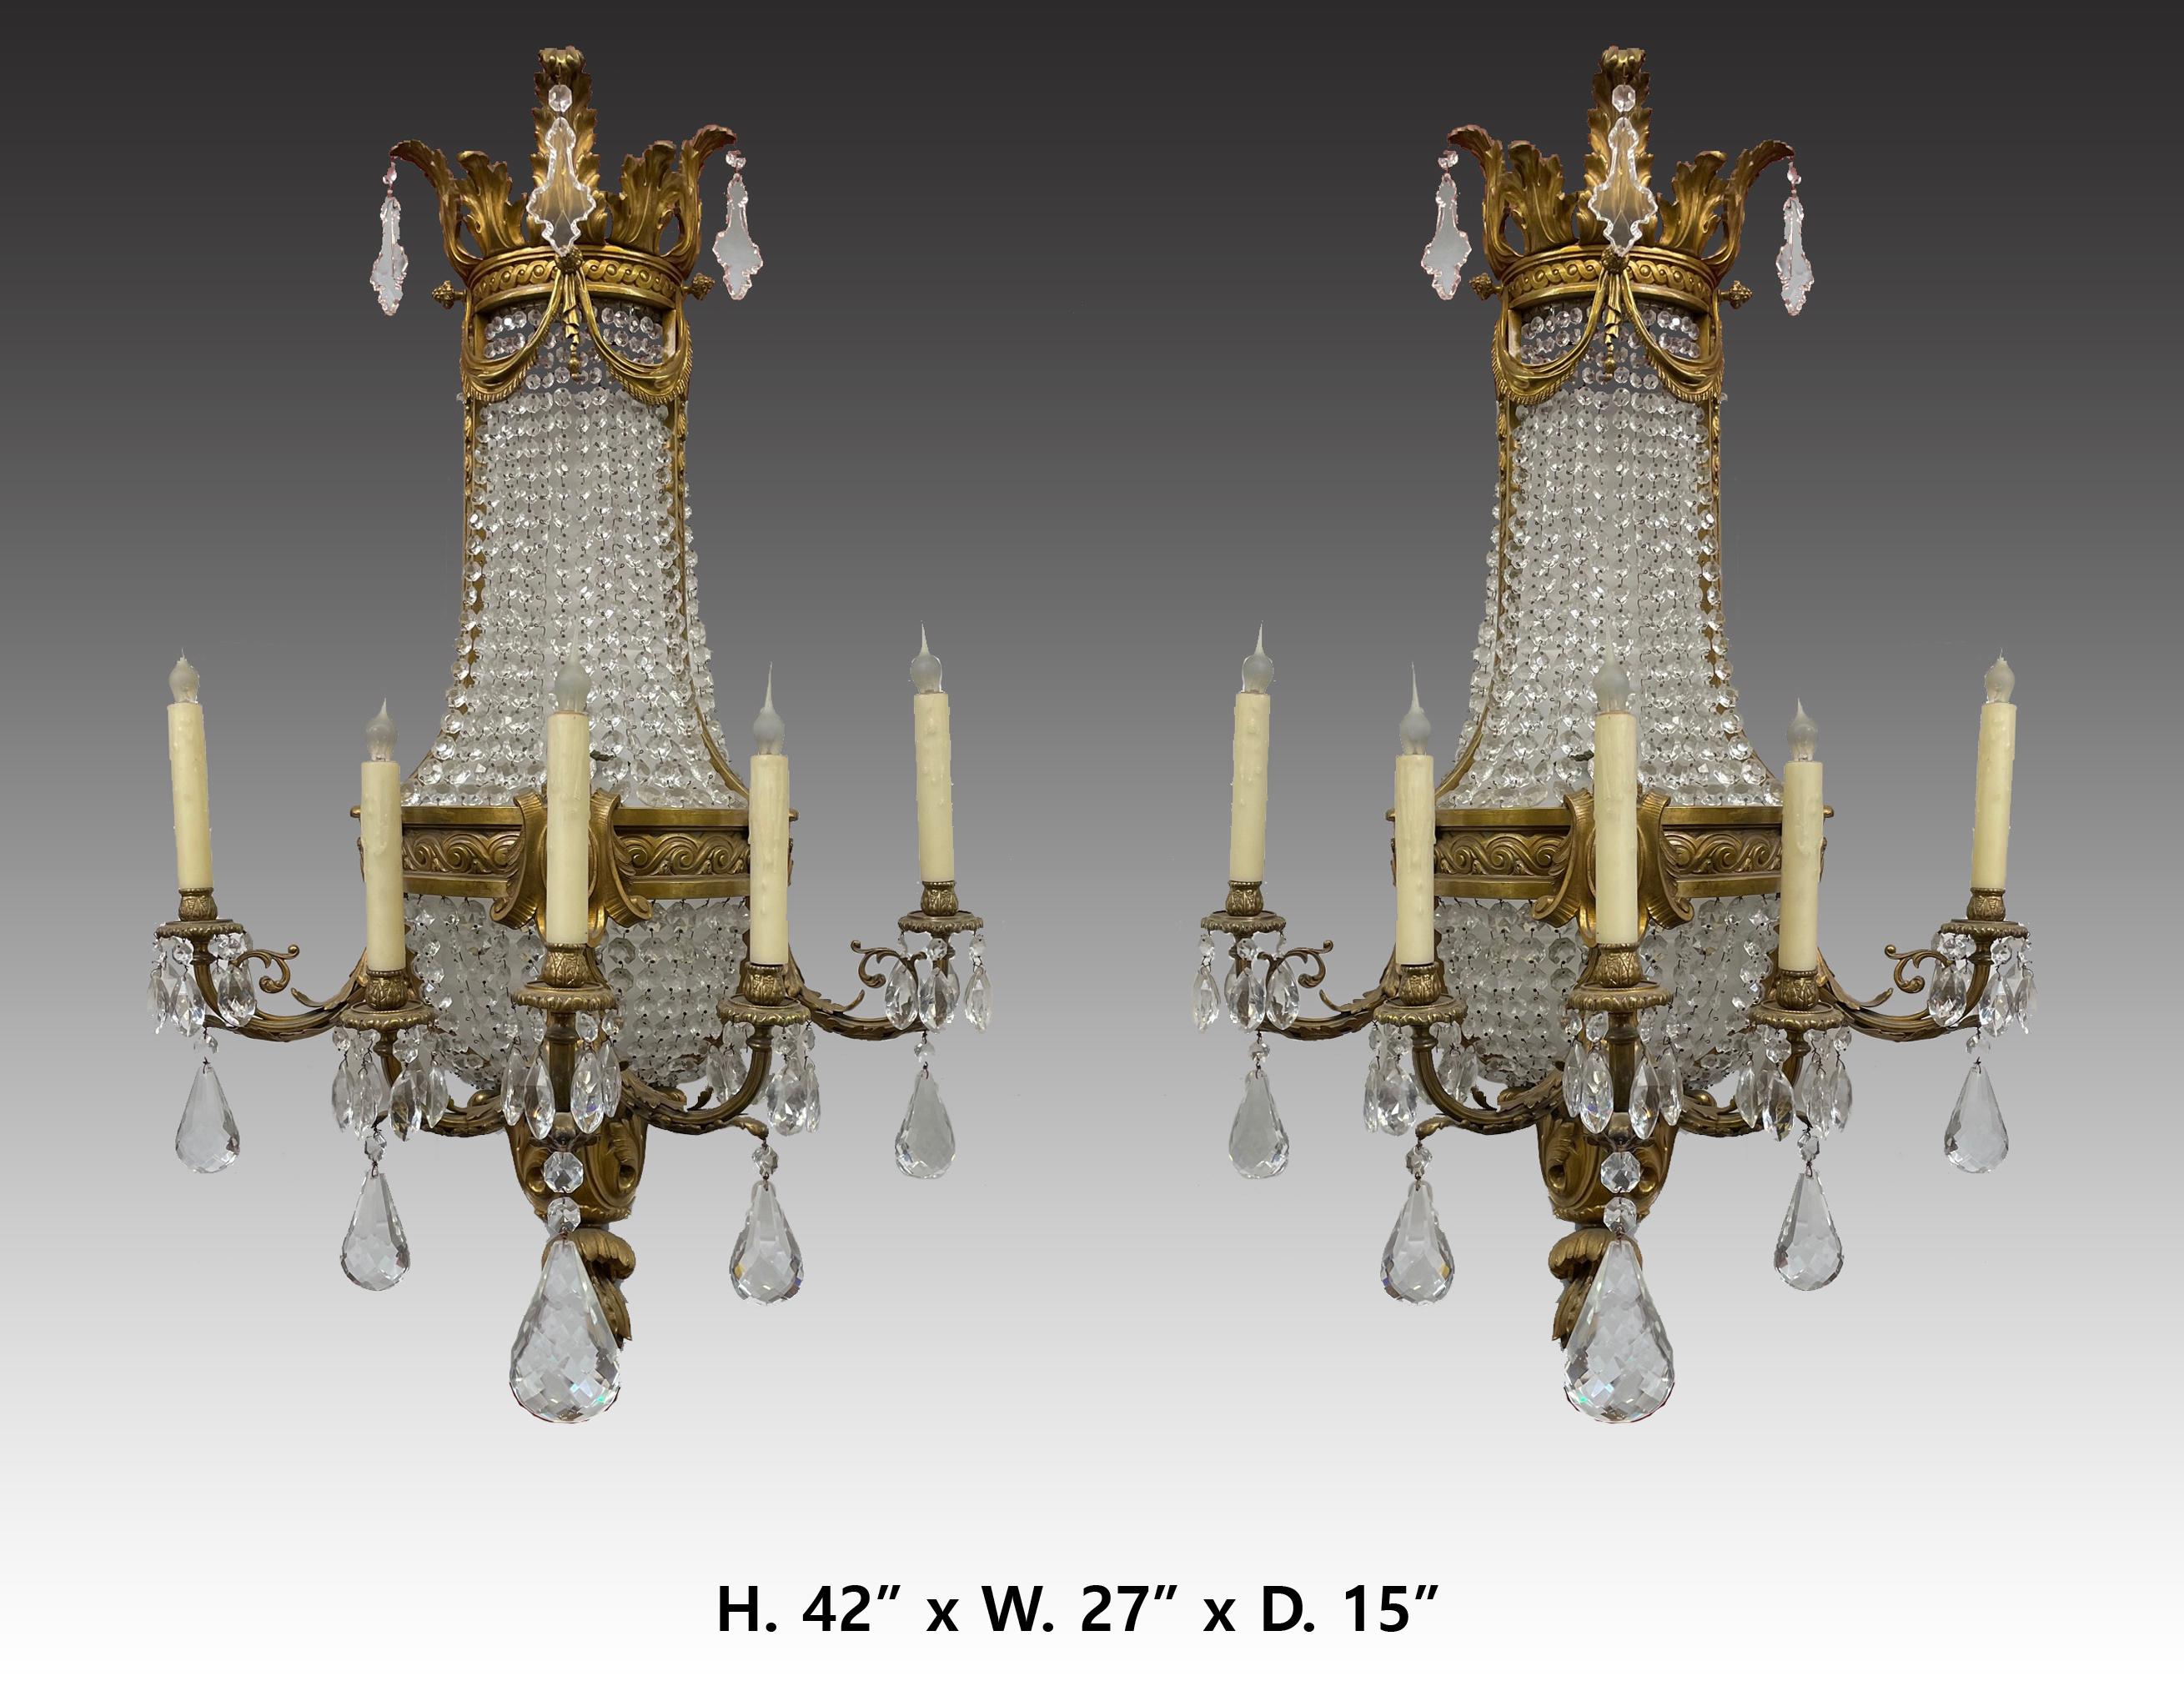 Magnificent large French 19 century pair of Louis XV style ormolu mounted and cut crystal Five light sconces.
Meticulous attention has been given to every details, the sconces are beautifully proportioned and make great statement. 
Measures: H.